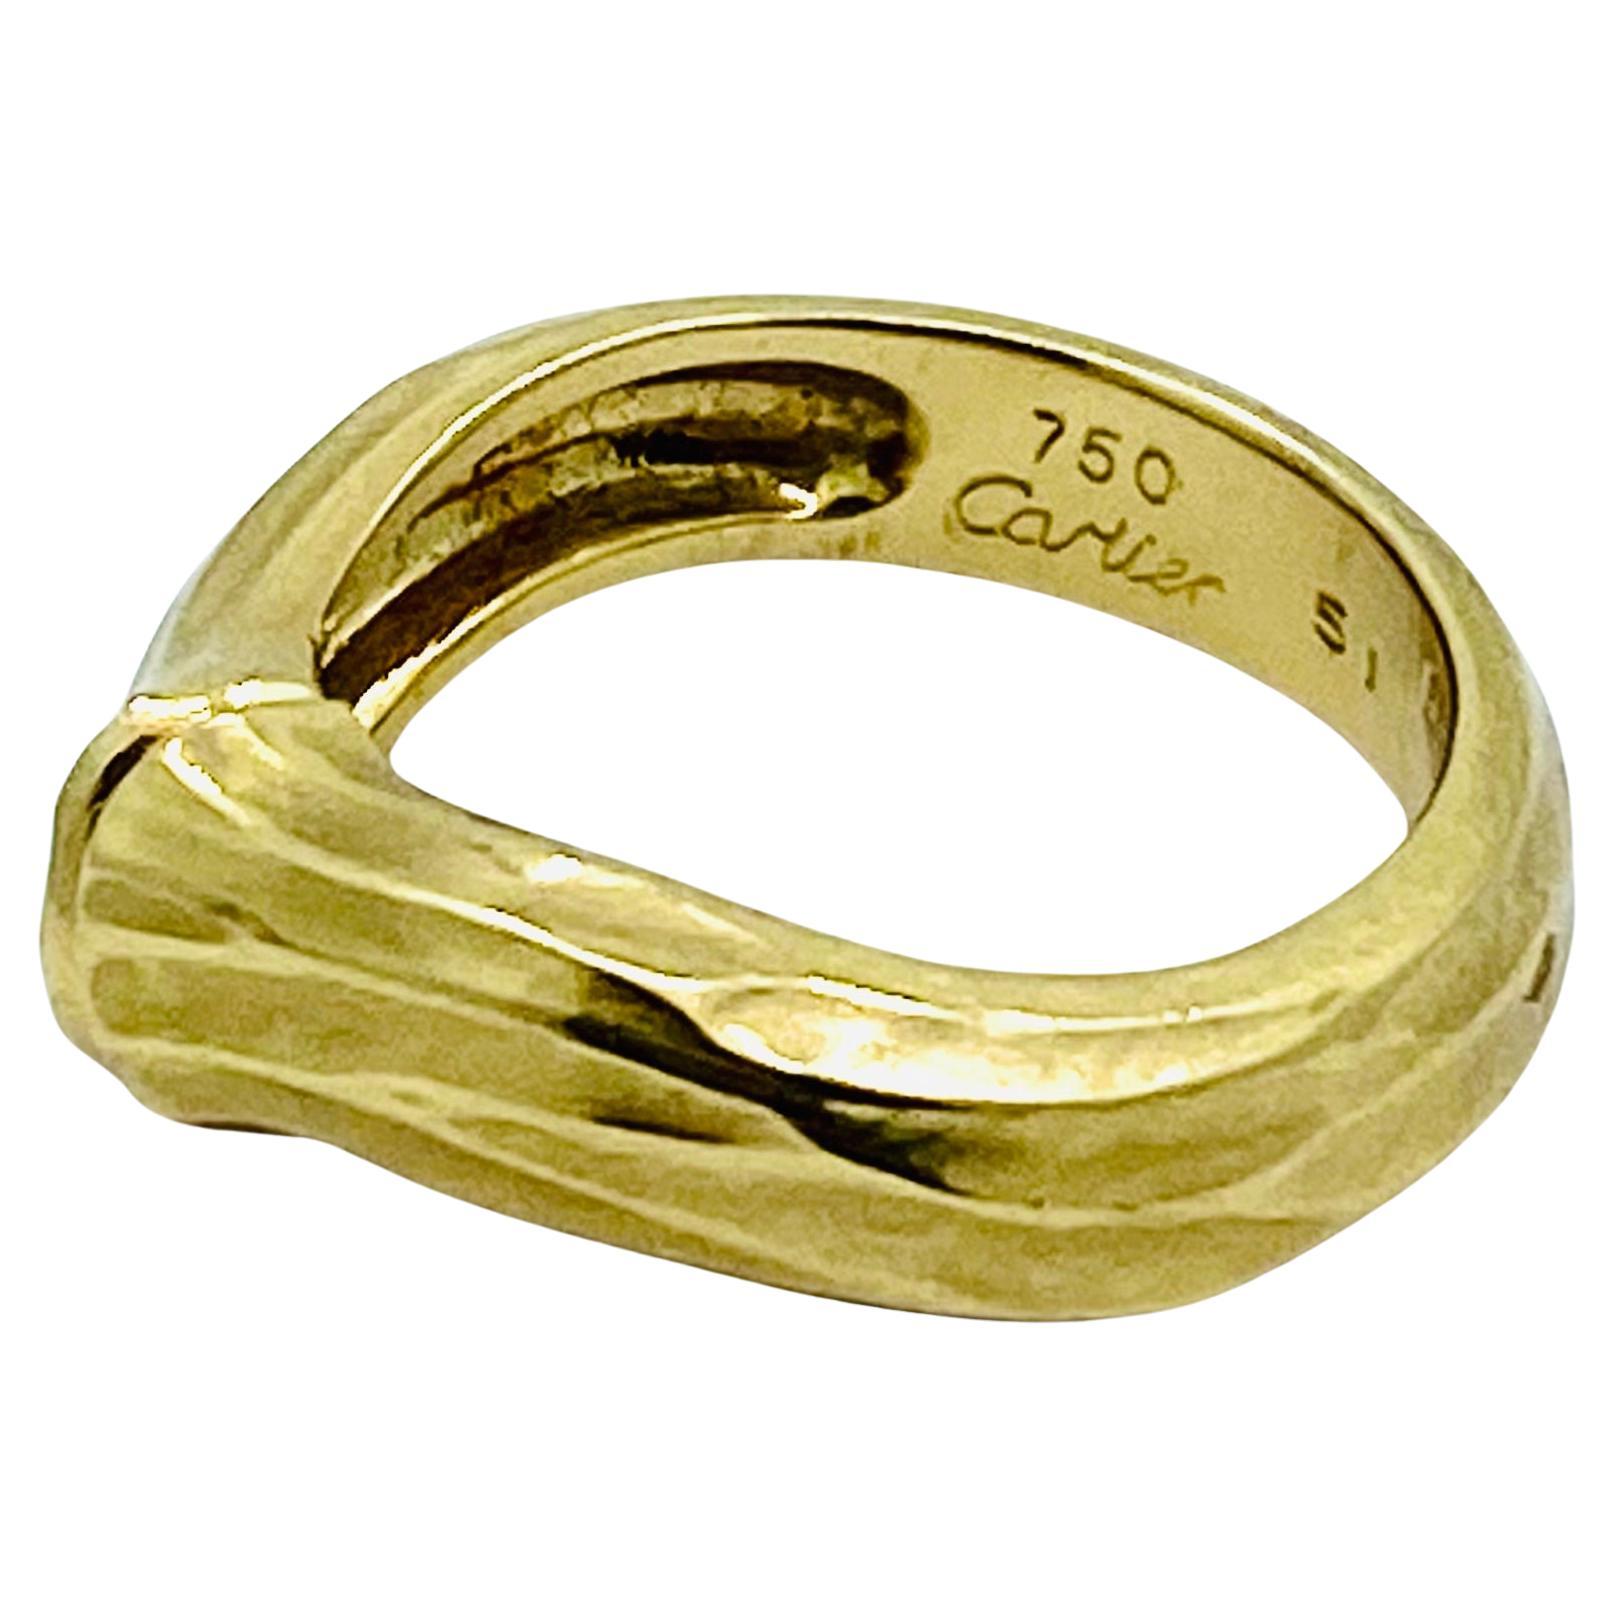 Vintage Cartier Bamboo Ring 18k Gold For Sale 2